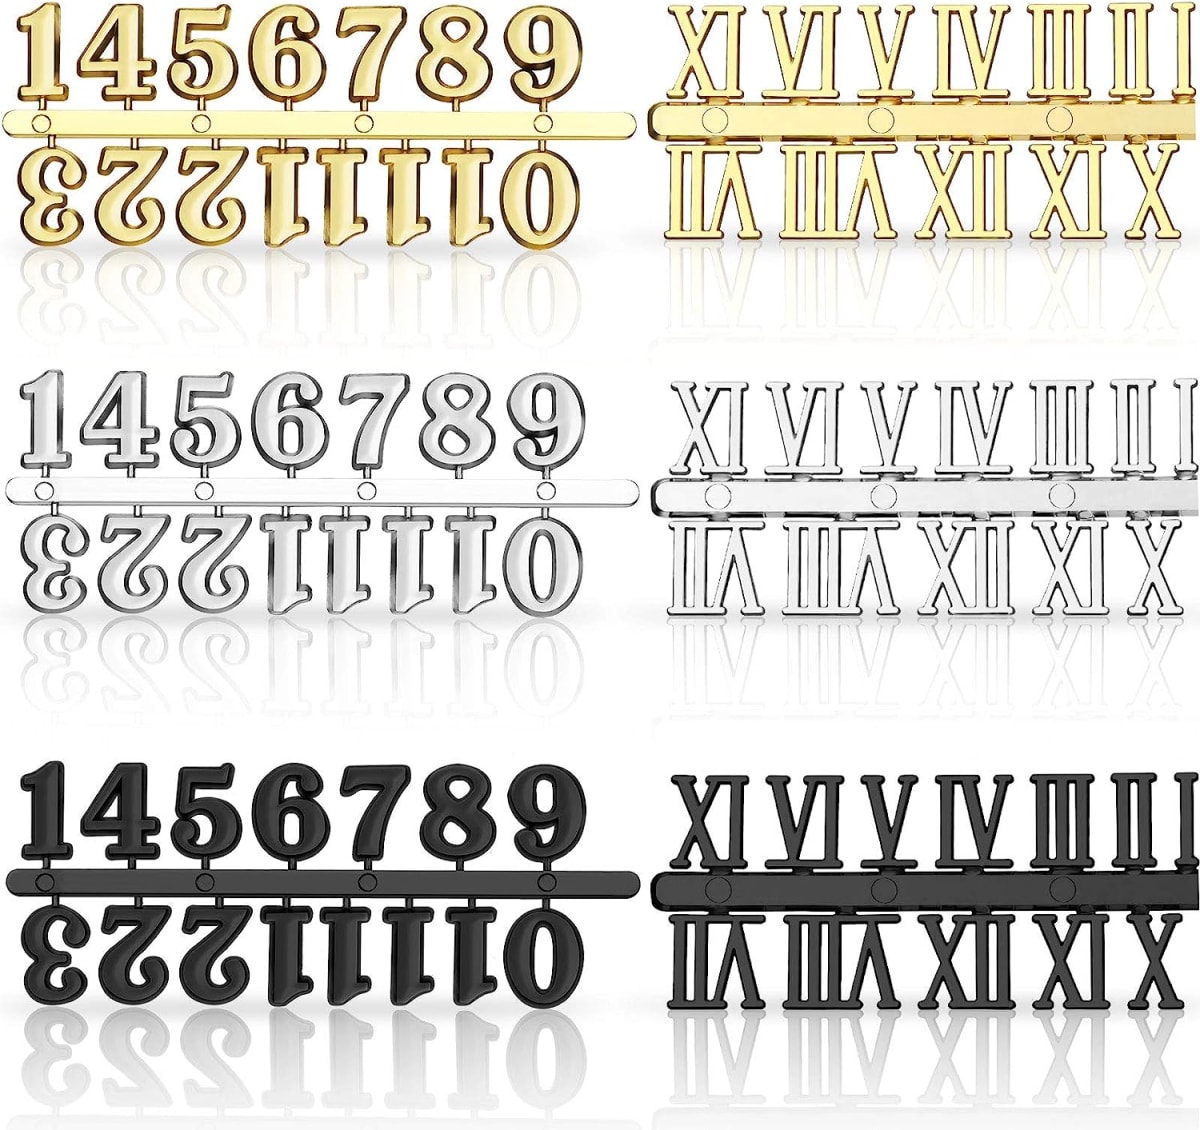 Clock Numerals Kit Including Arabic Number and Roman Number